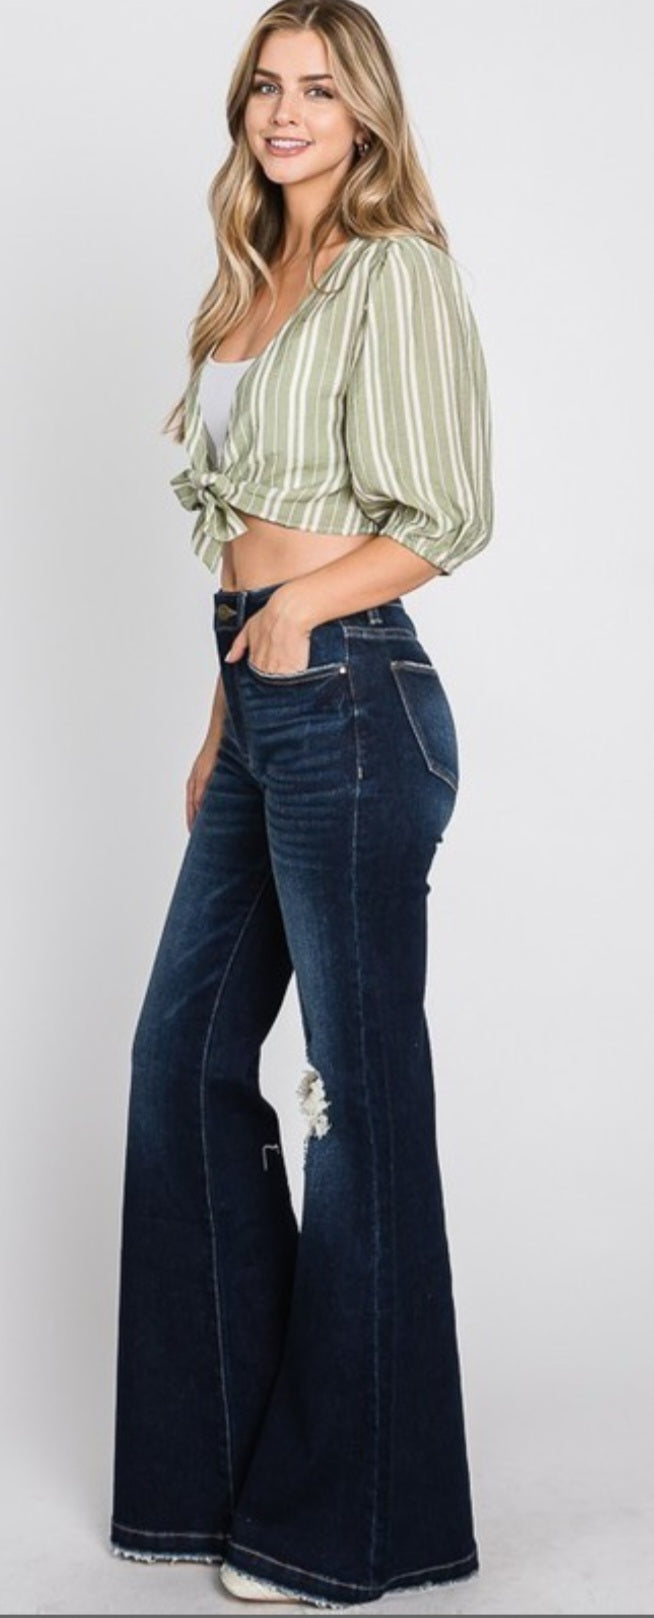 I Love The 70s Flare Jeans